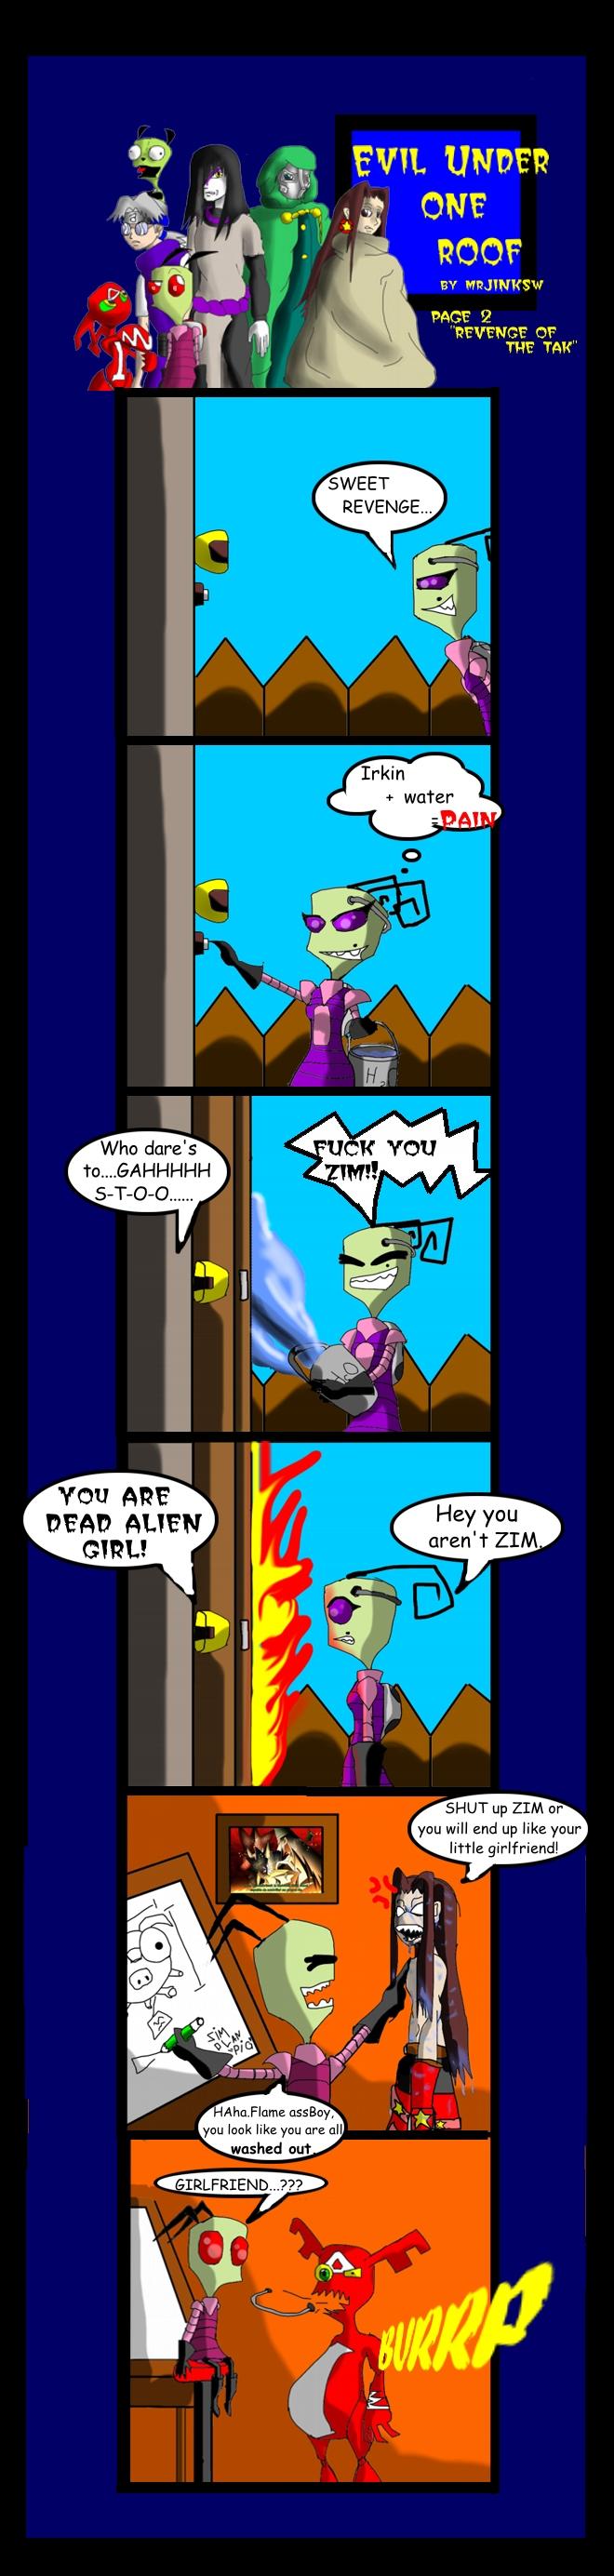 Evil undear one roof page 2 " Reavenge of the Tak"